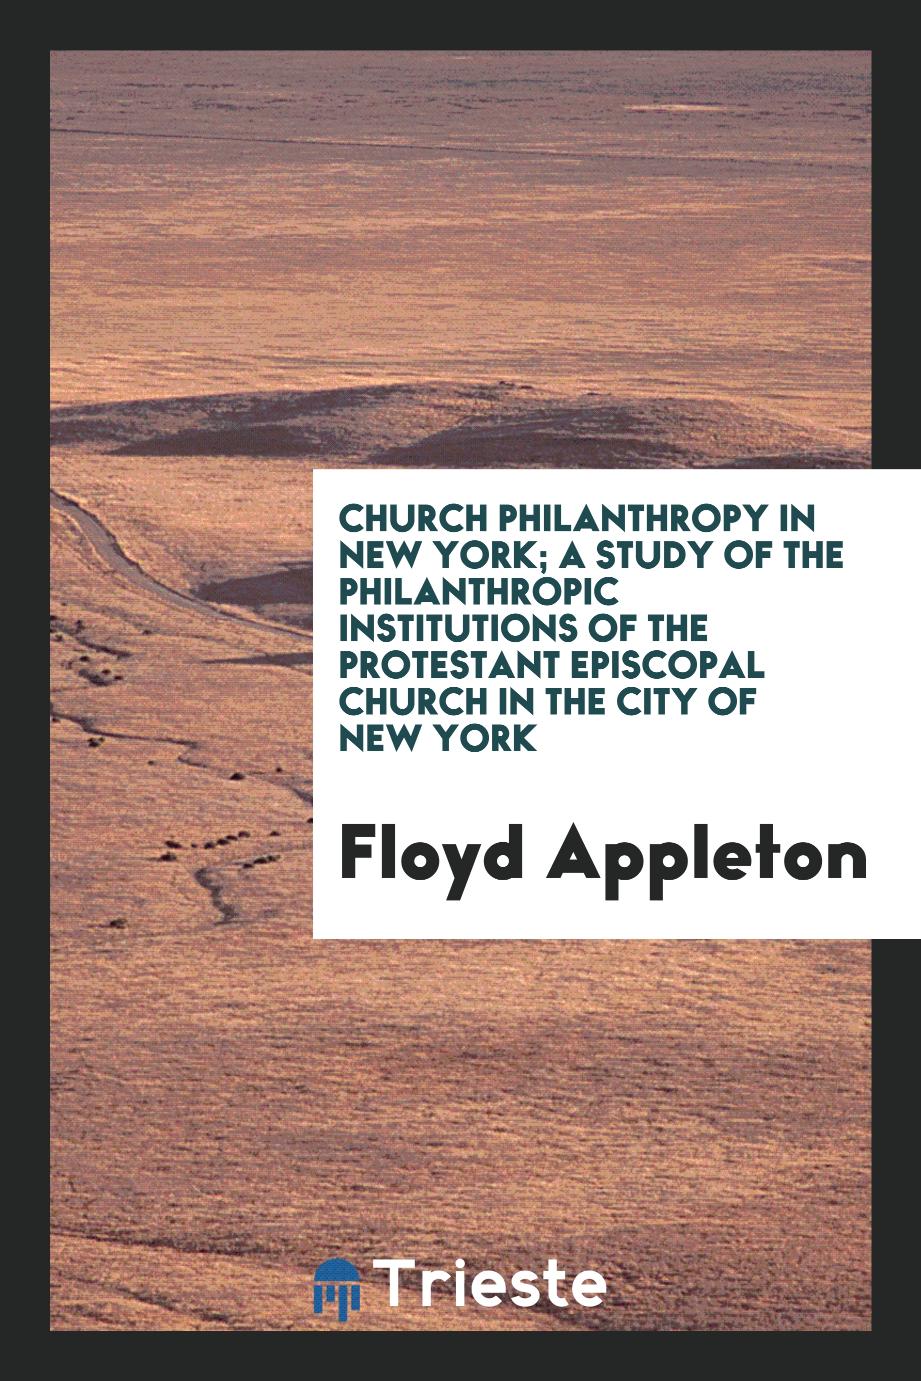 Floyd Appleton - Church Philanthropy in New York; A Study of the Philanthropic Institutions of the Protestant Episcopal Church in the City of New York